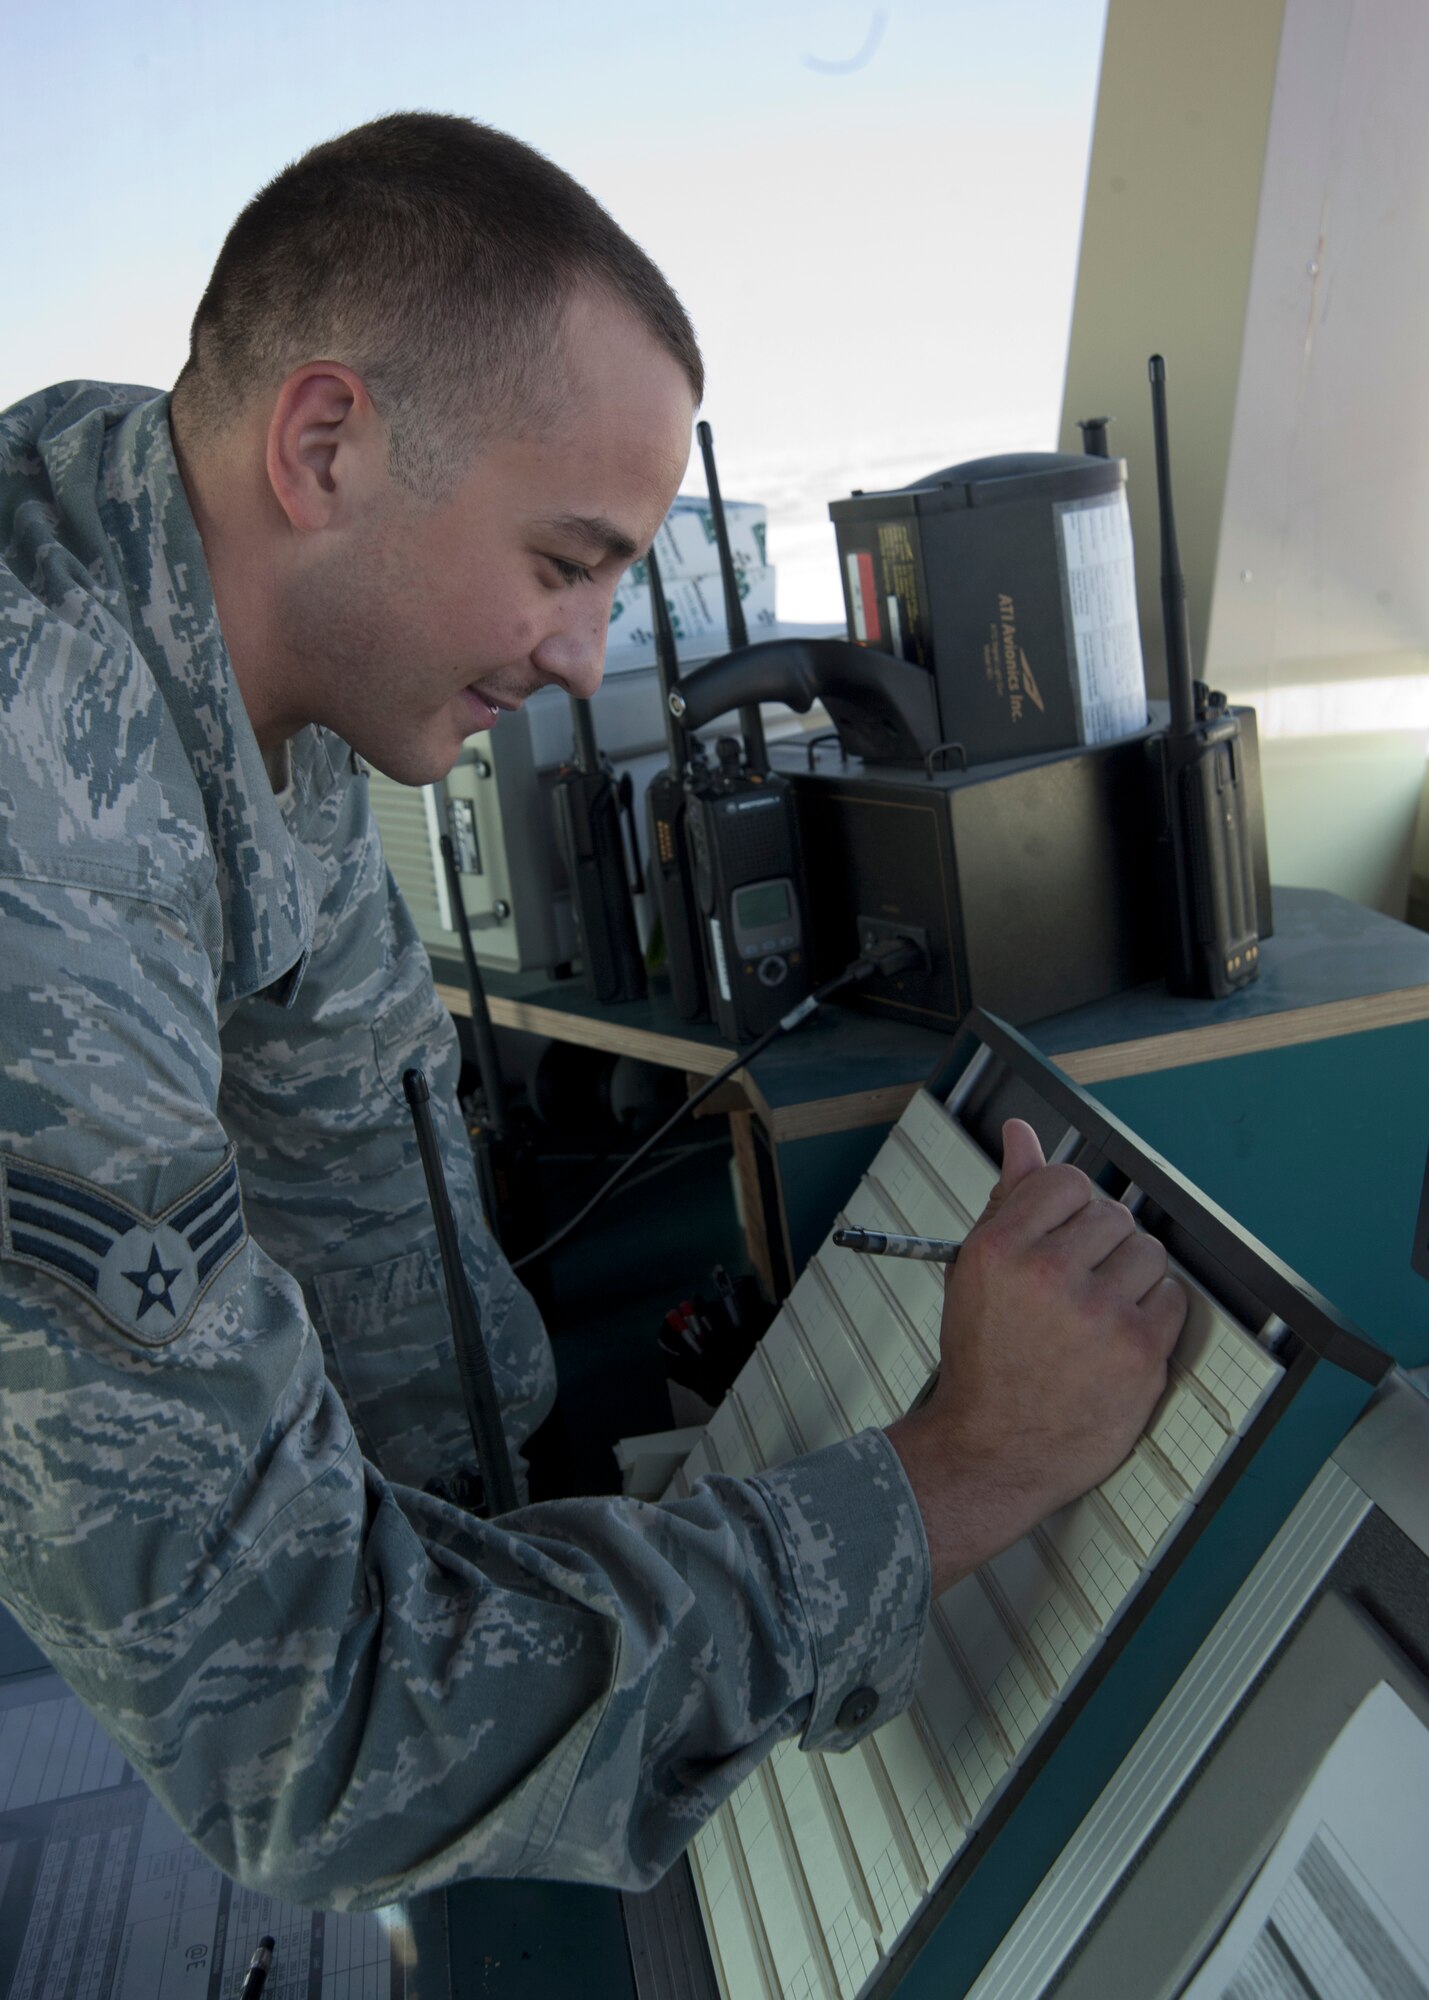 Senior Airman Kevin Krippner fills out a flight progress strip used to keep track of aircraft entering and exiting the airfield at the 379th Air Expeditionary Wing in Southwest Asia, Aug. 13, 2013. Krippner is a 379th Expeditionary Operations Support Squadron air traffic controller deployed from Holloman Air Force Base, N.M., and hails from Winchester, Va. (U.S. Air Force photo/Senior Airman Bahja J. Jones)